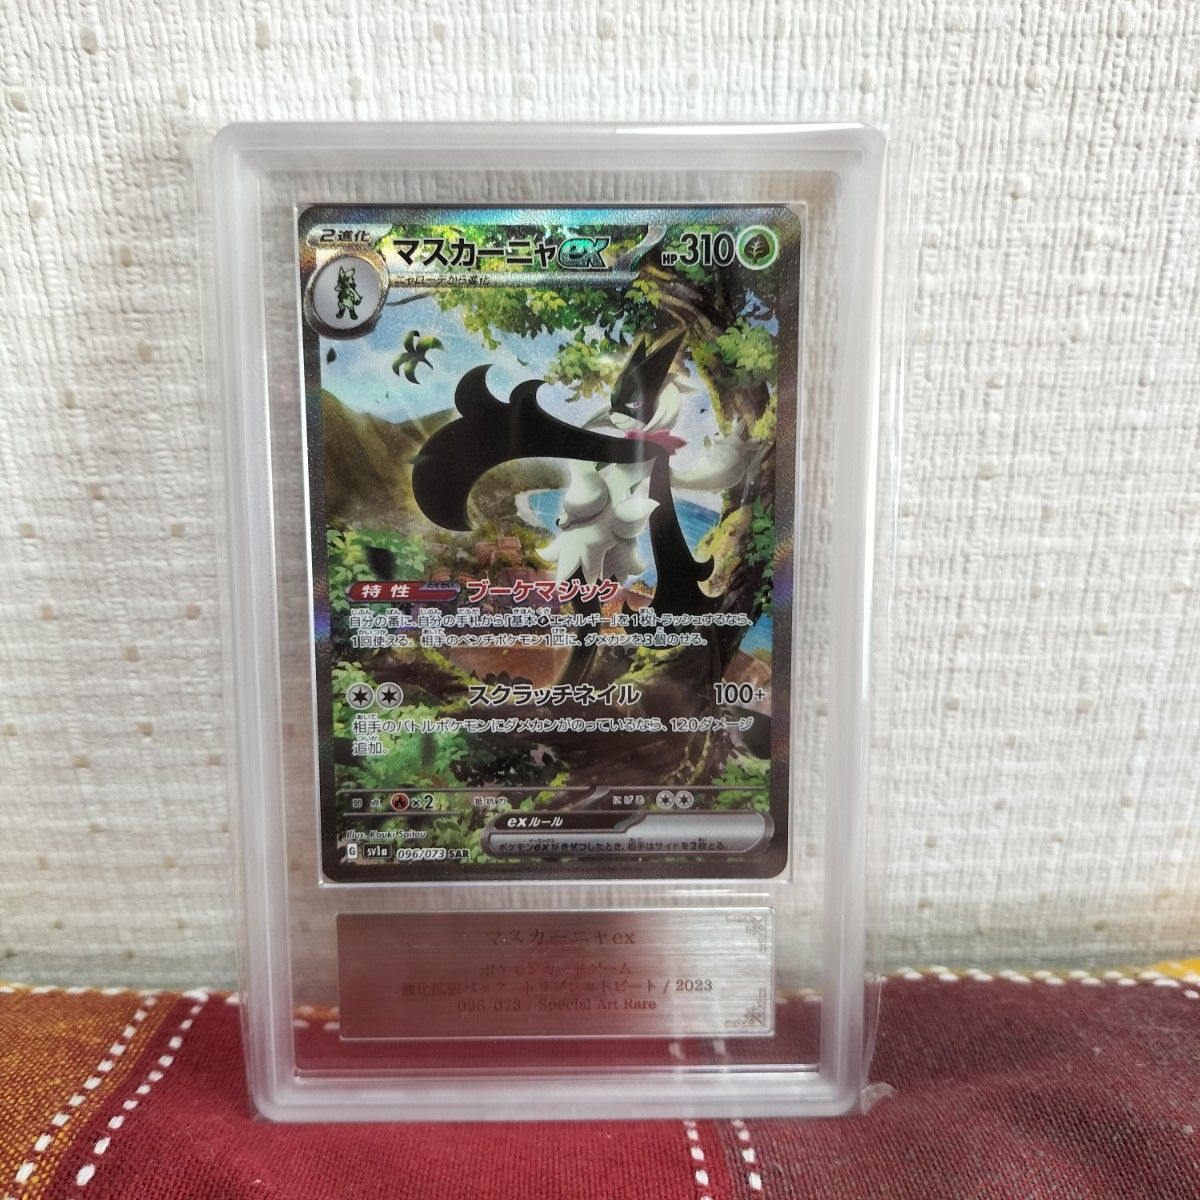 Gold Star Rayquaza Pokémon card sells for over $38,000